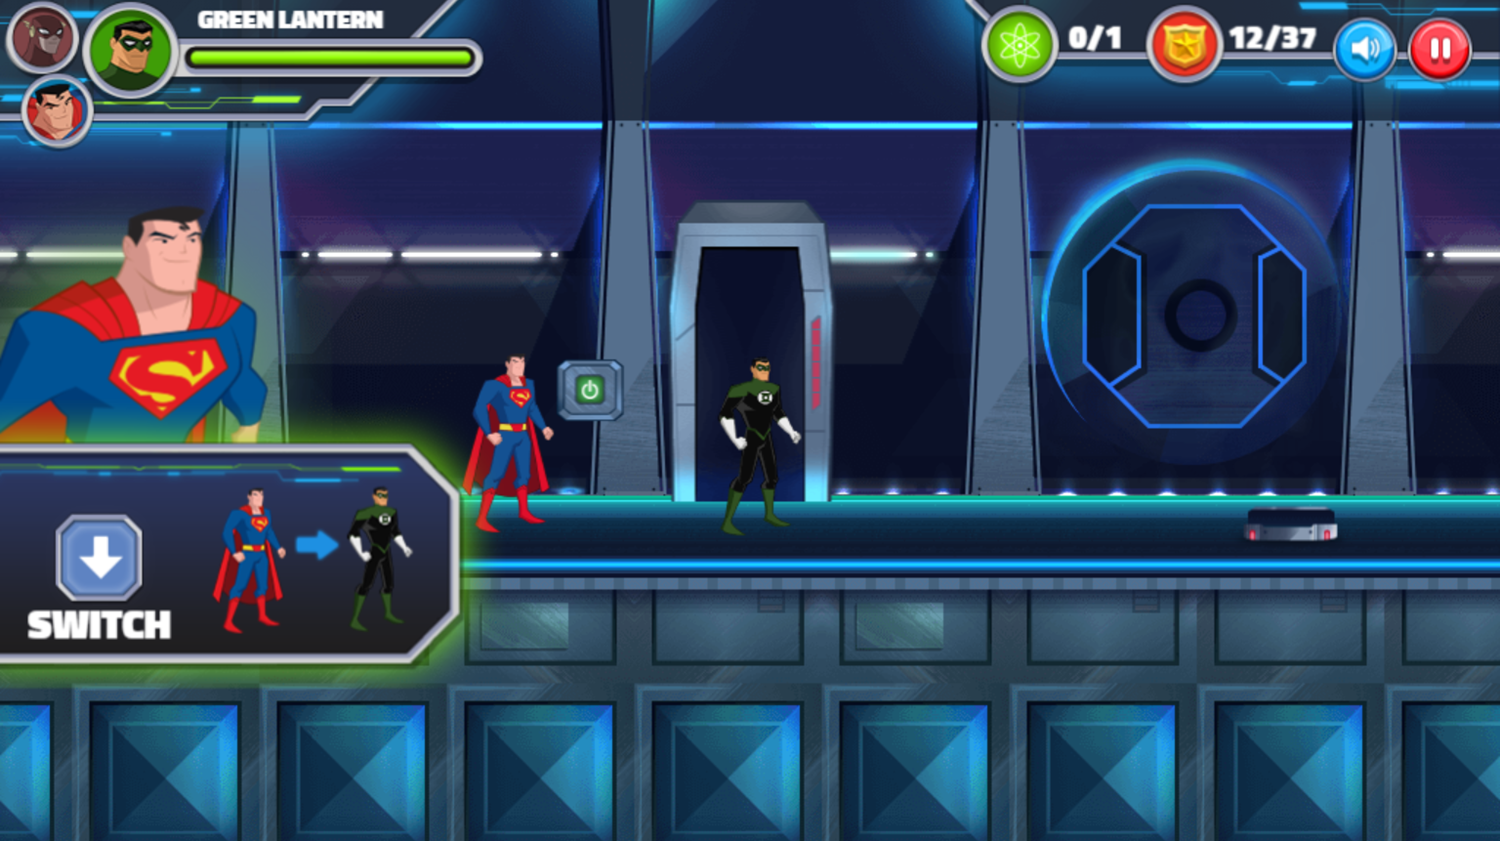 Justice League Action Nuclear Rescue Game How To Switch Screenshot.